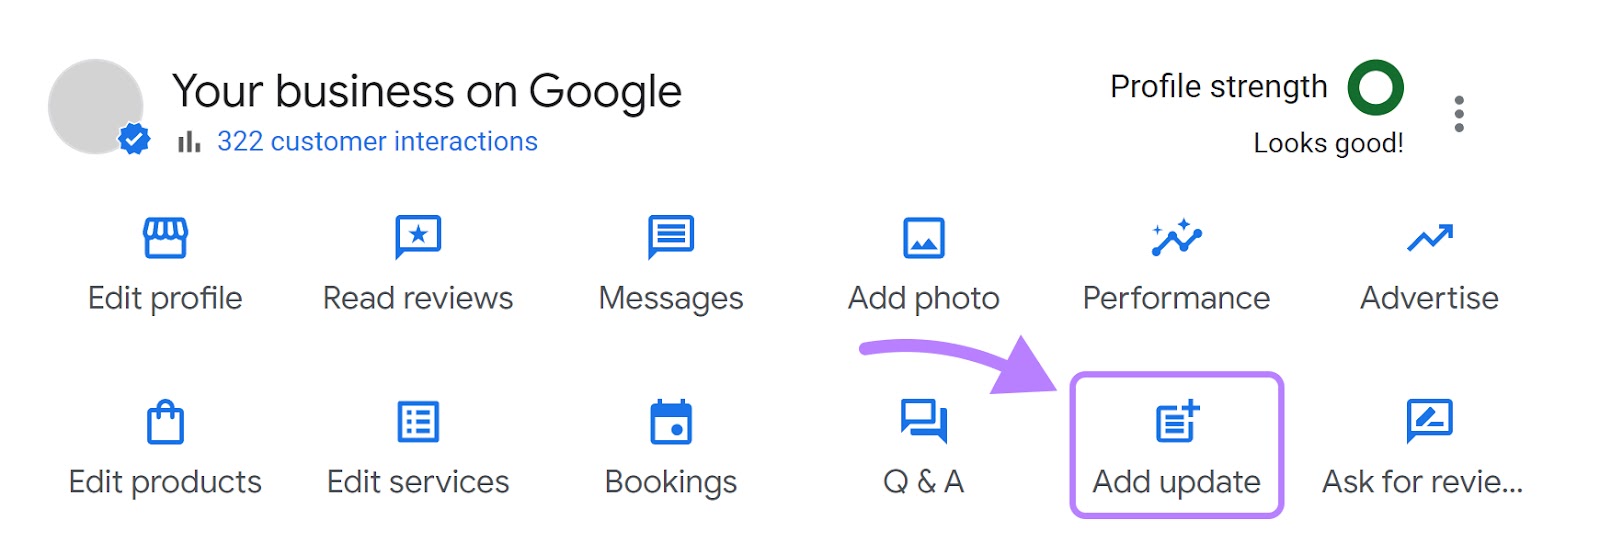 “Add update” button selected on Google My Business dashboard